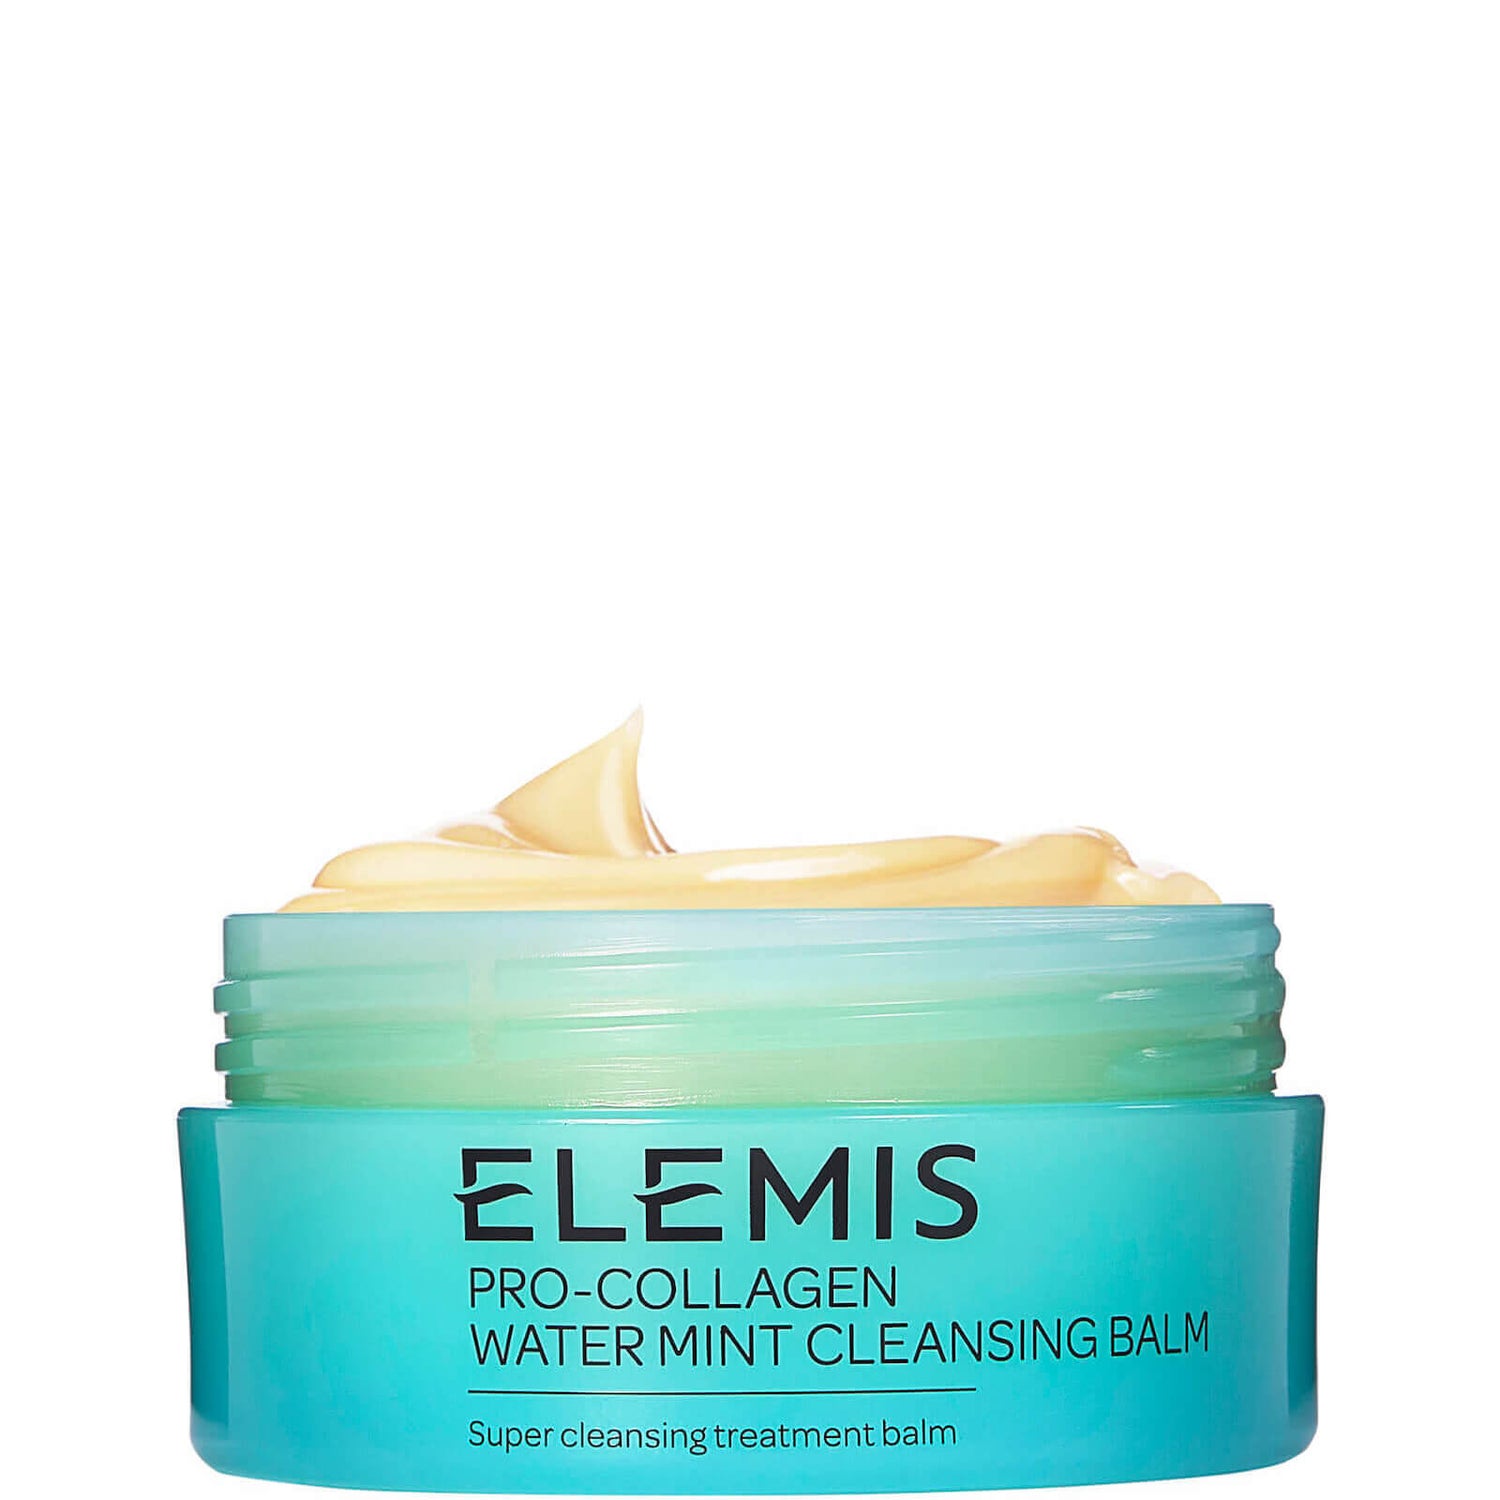 Pro-Collagen Water Mint Cleansing Balm100g 骨膠原水薄荷卸妝膏100g